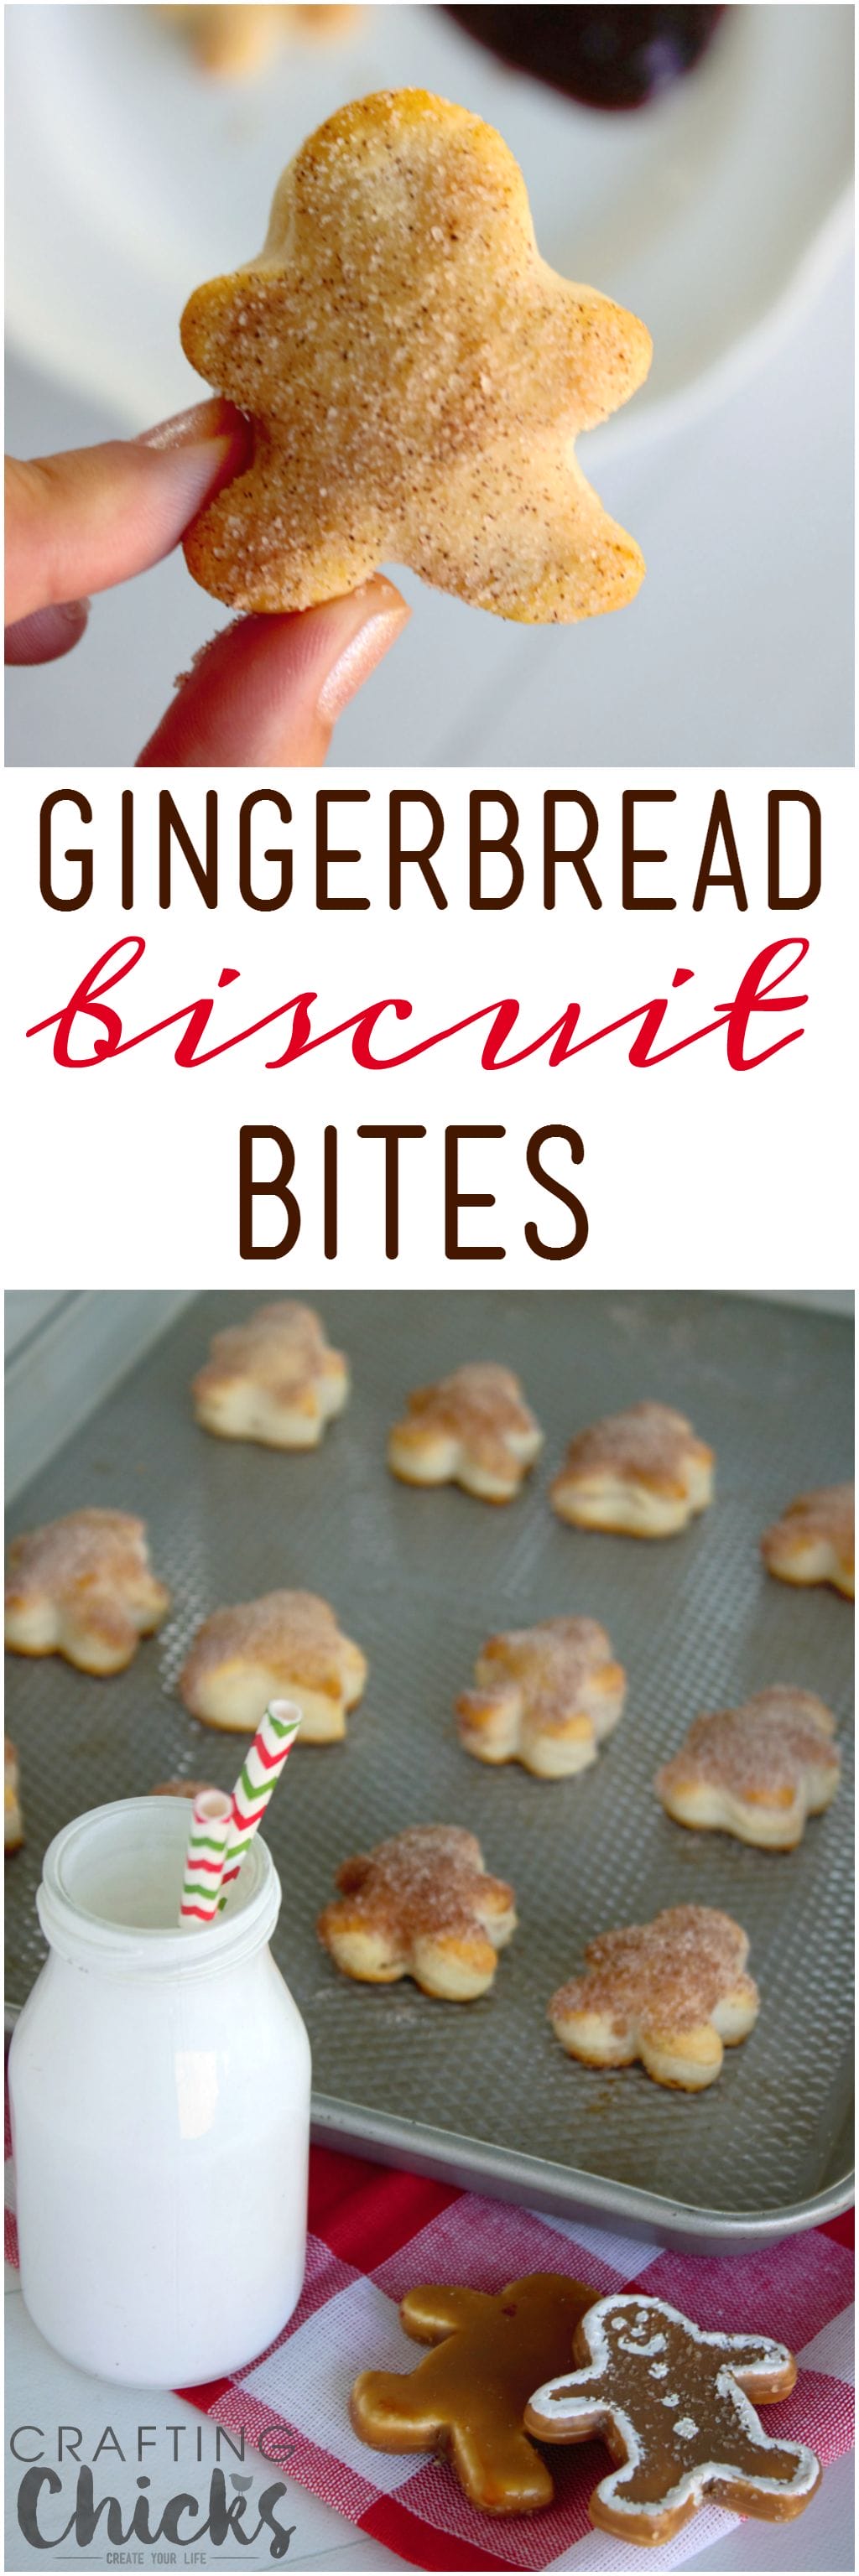 Gingerbread Biscuit Bites are an easy, delicious sweet treat for your holiday breakfasts!